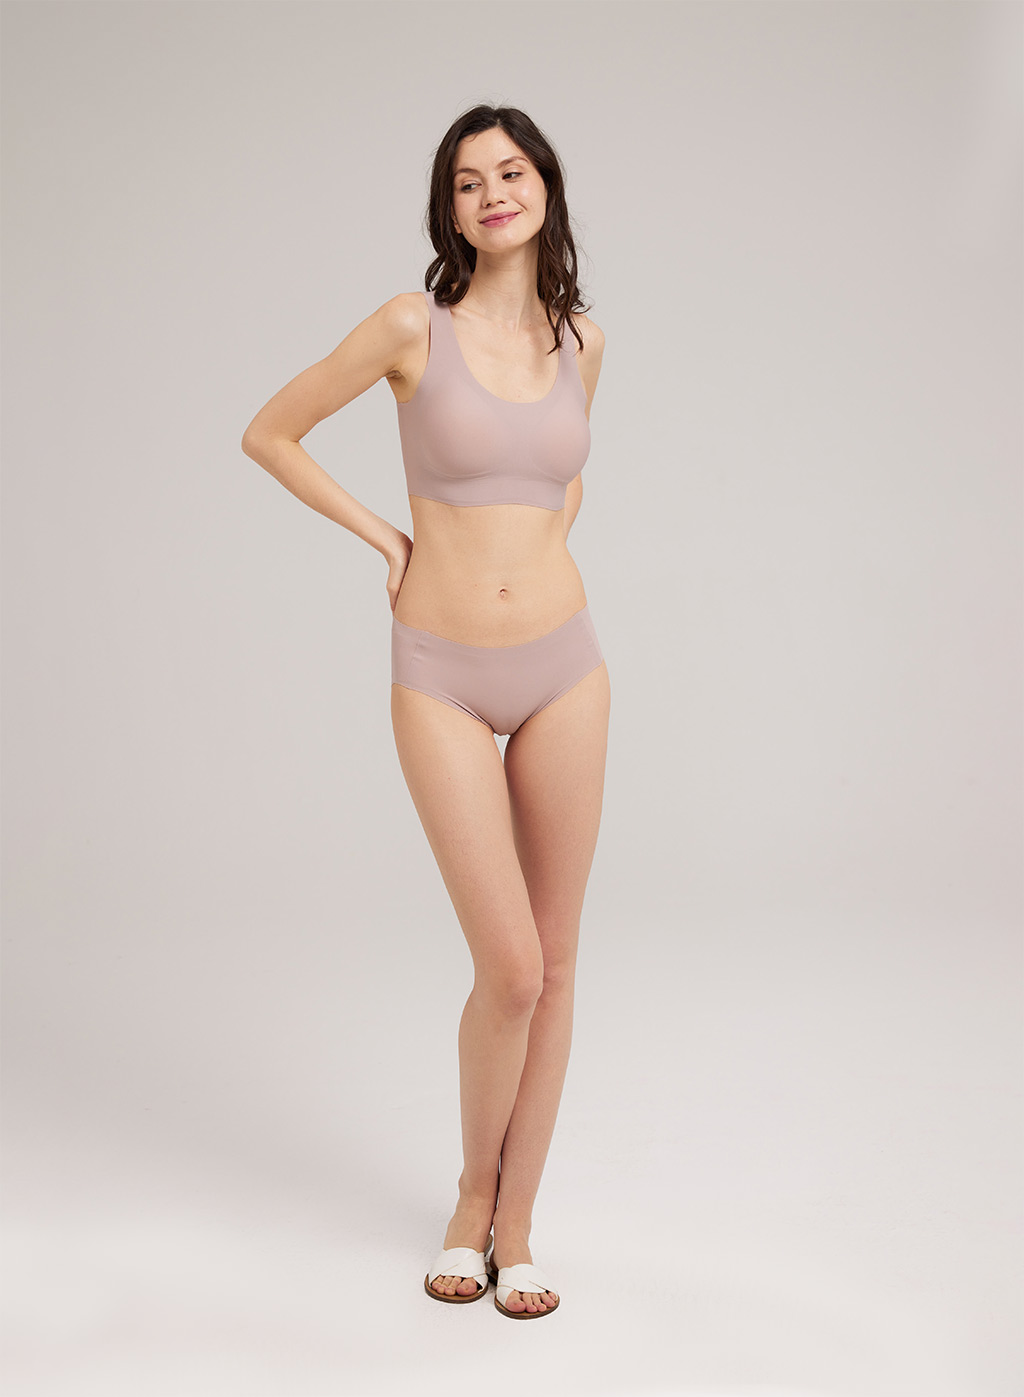 Seamless Hiphugger Underwear, Comfy Daily Panty